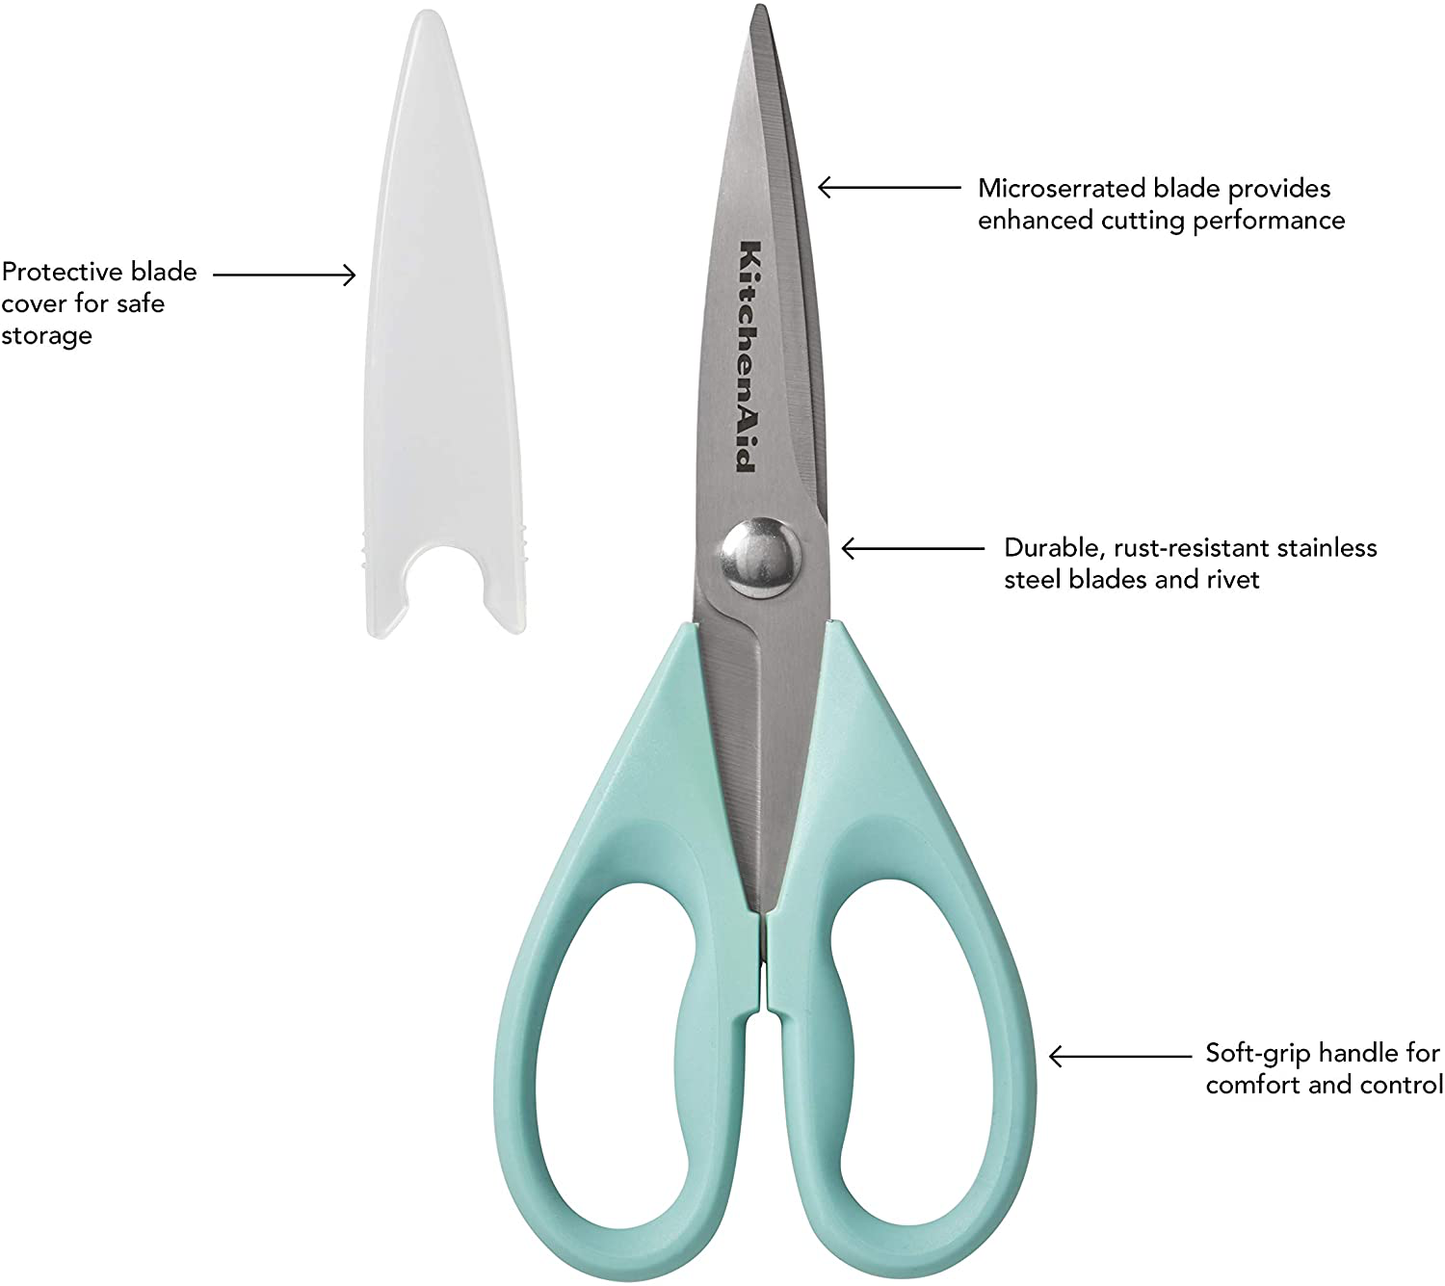 KitchenAid All Purpose Shears with Protective Sheath, 8.72-Inch, Red